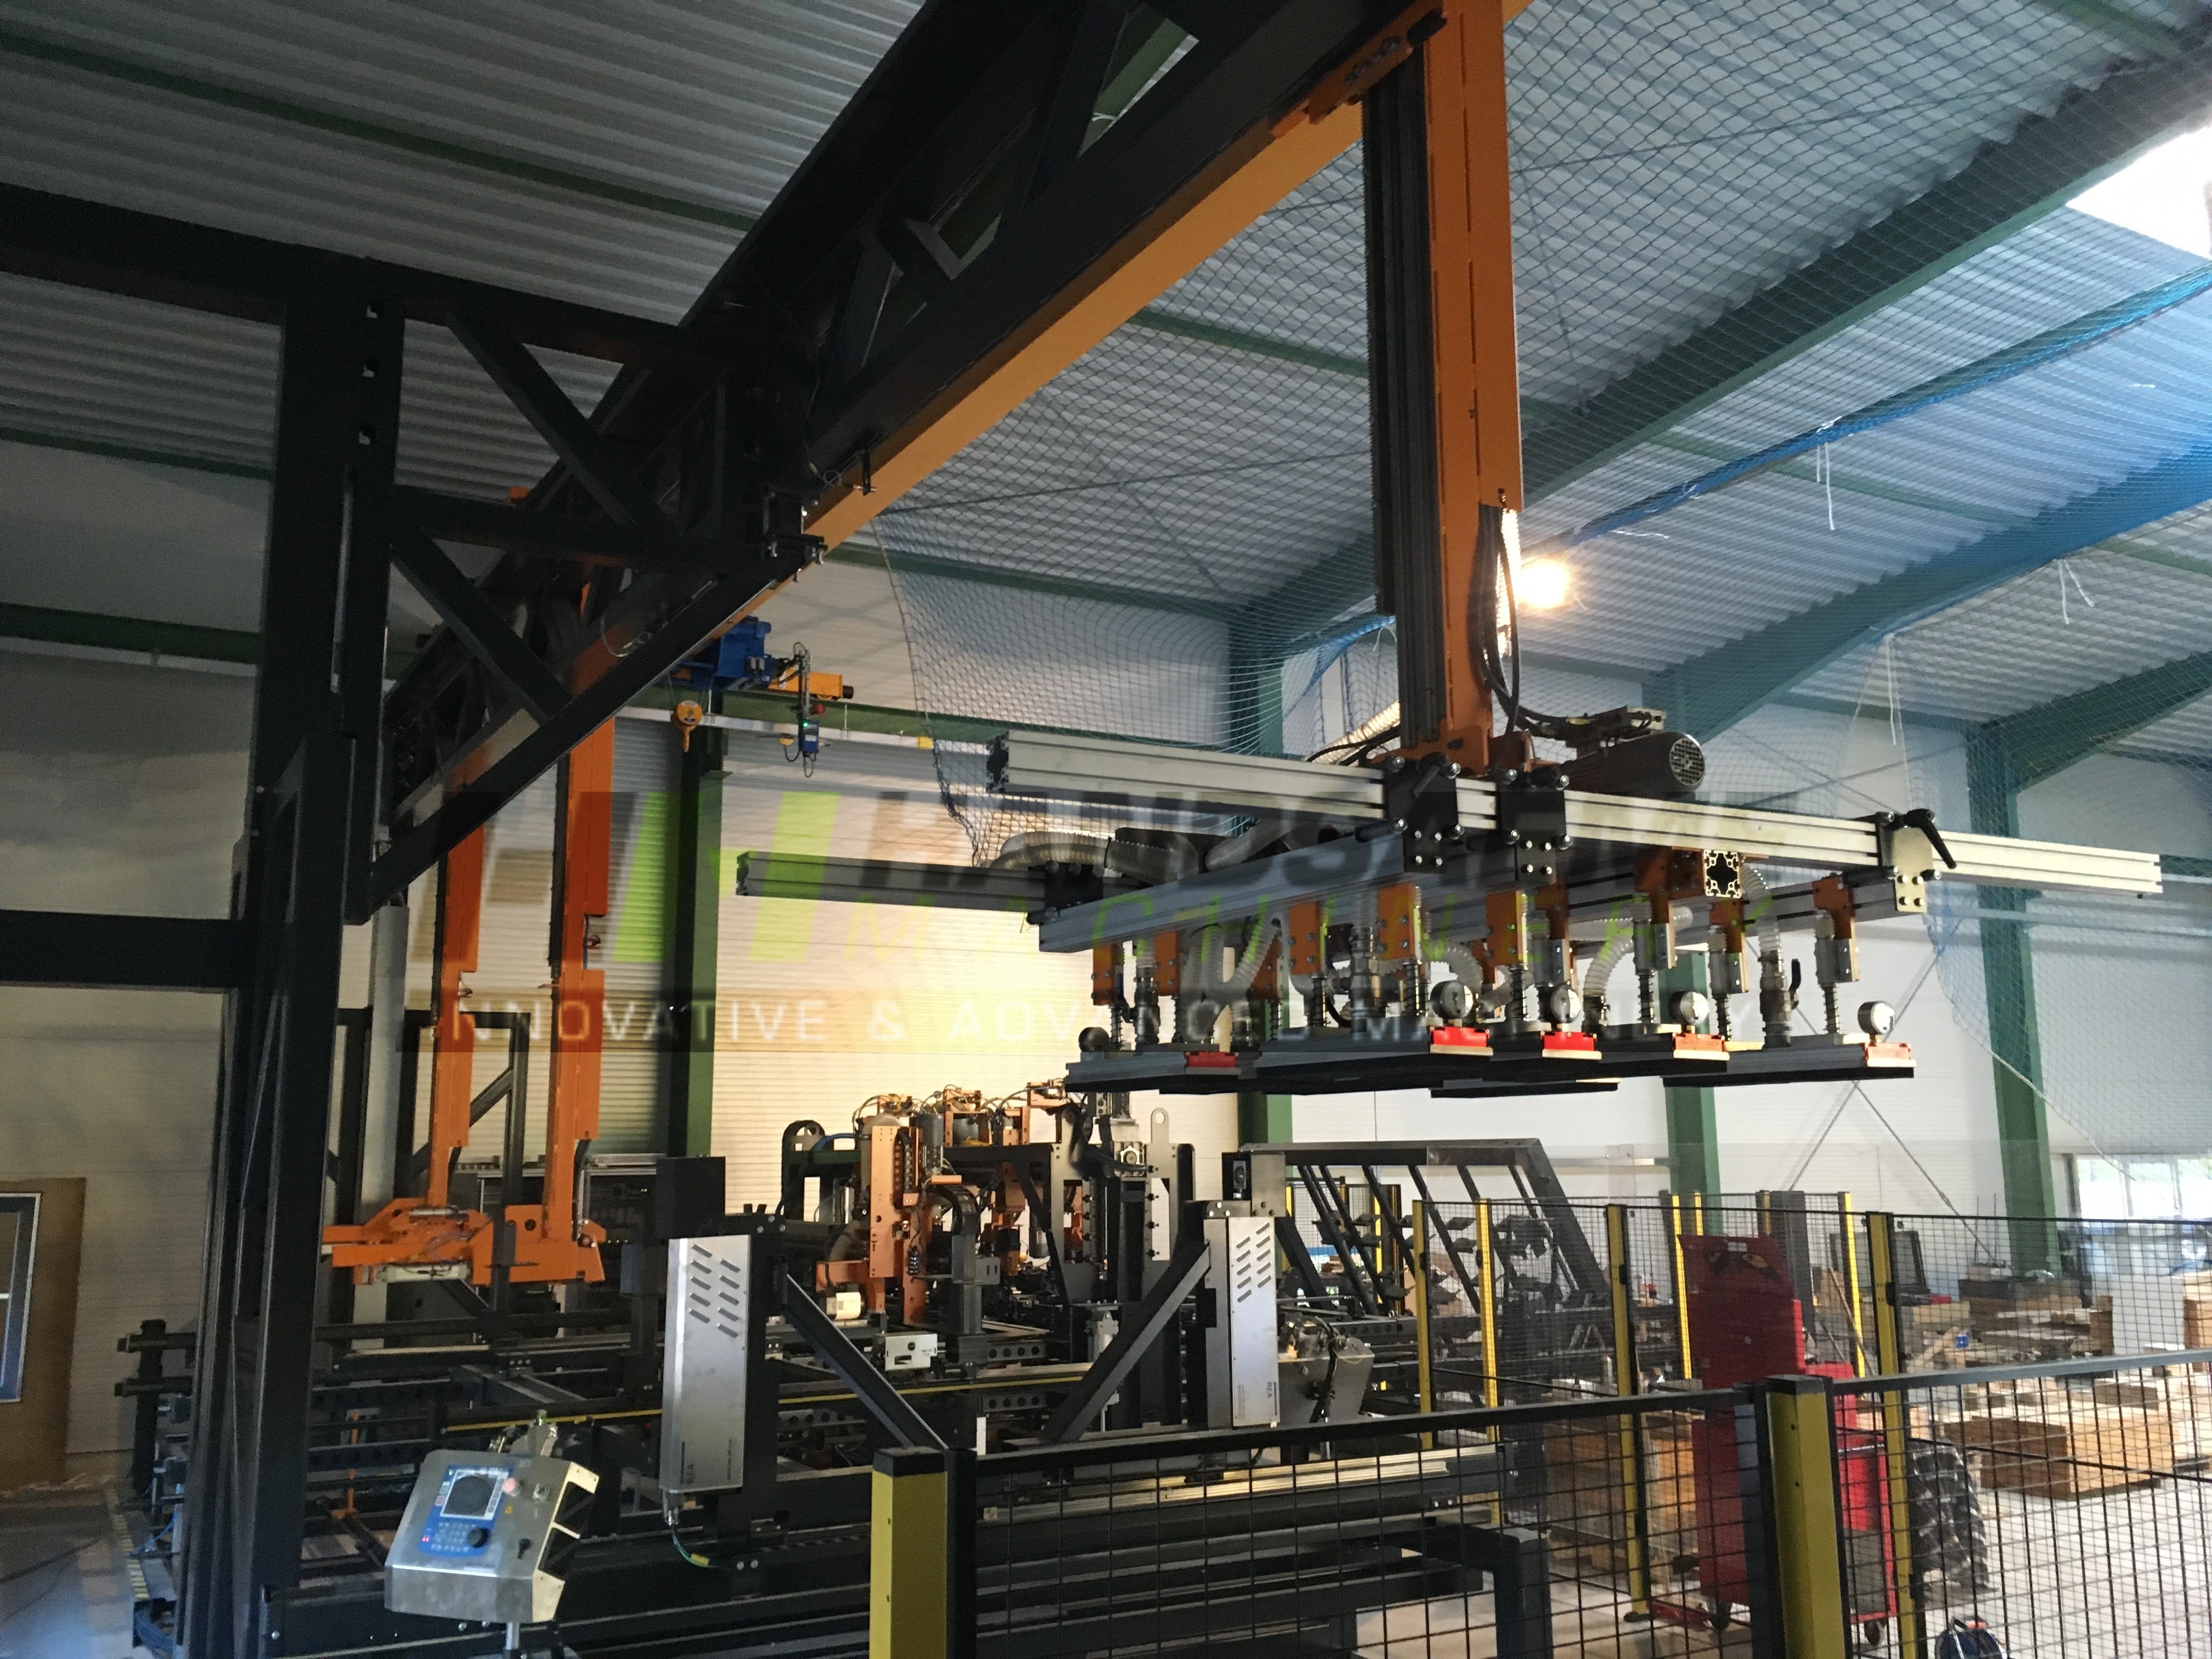 Machine in the spotlight: Automatic pallet nailing with minimum manpower